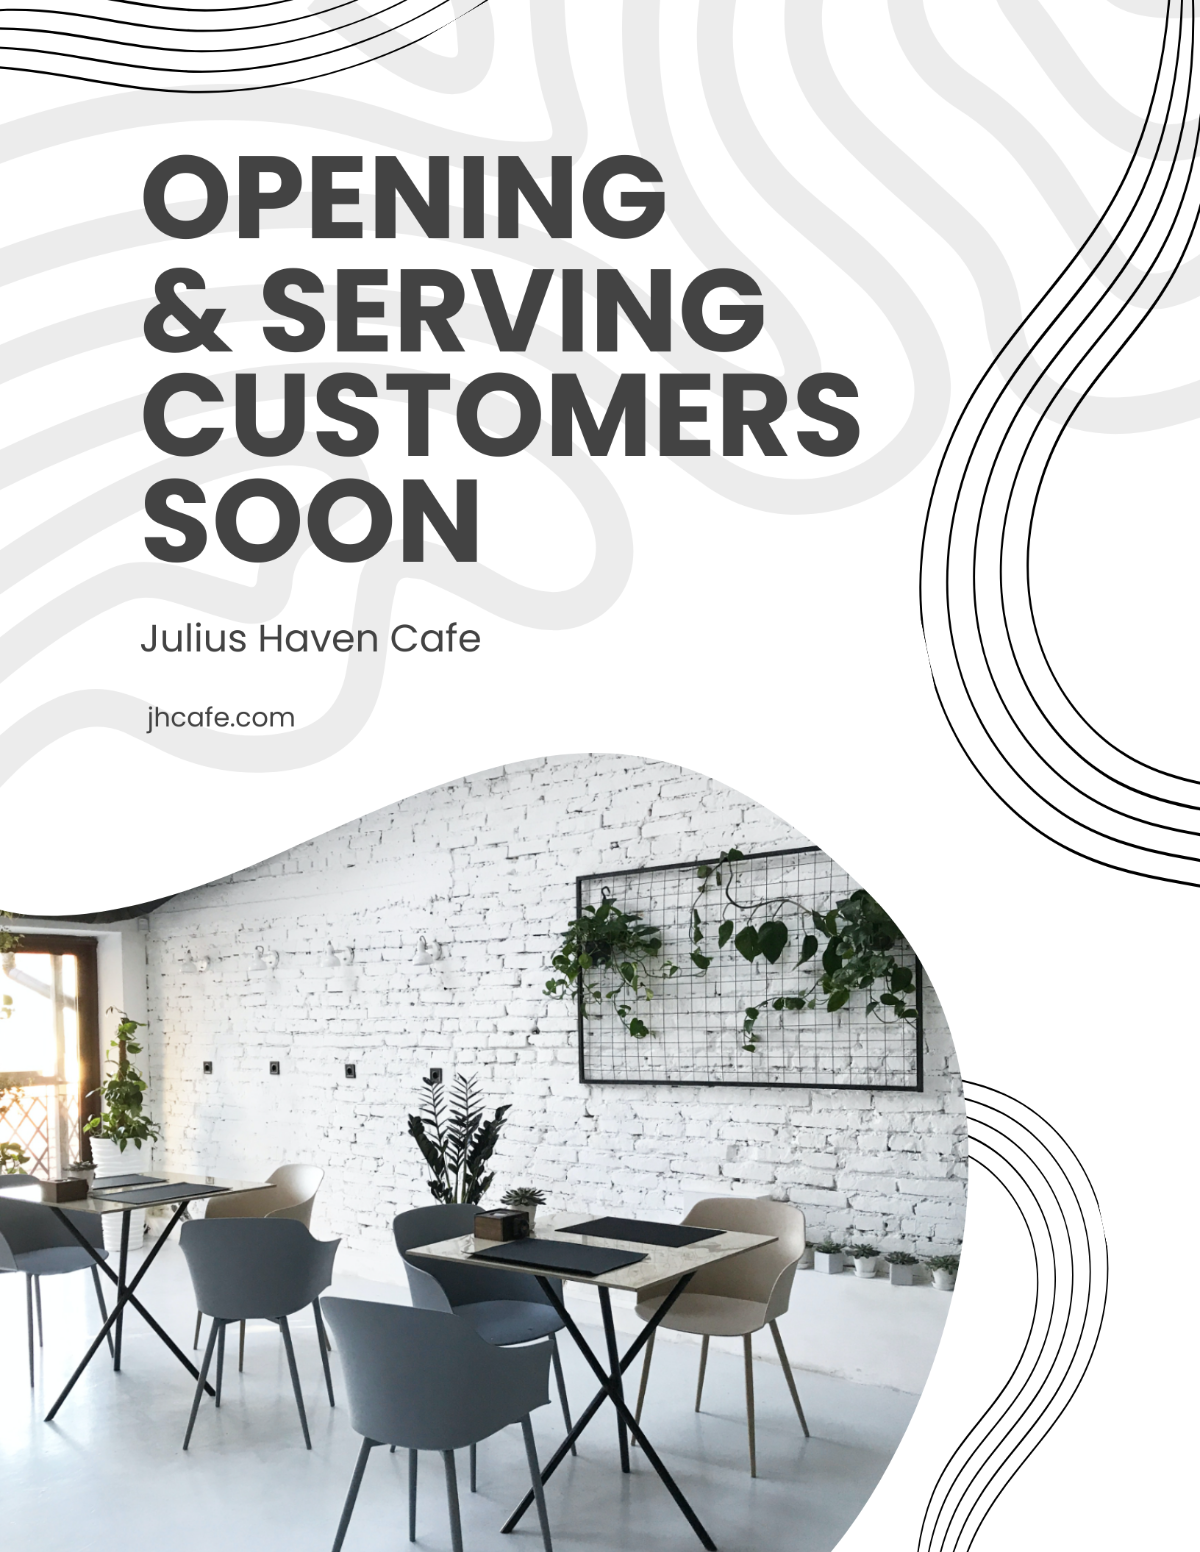 Cafe Opening Announcement Flyer